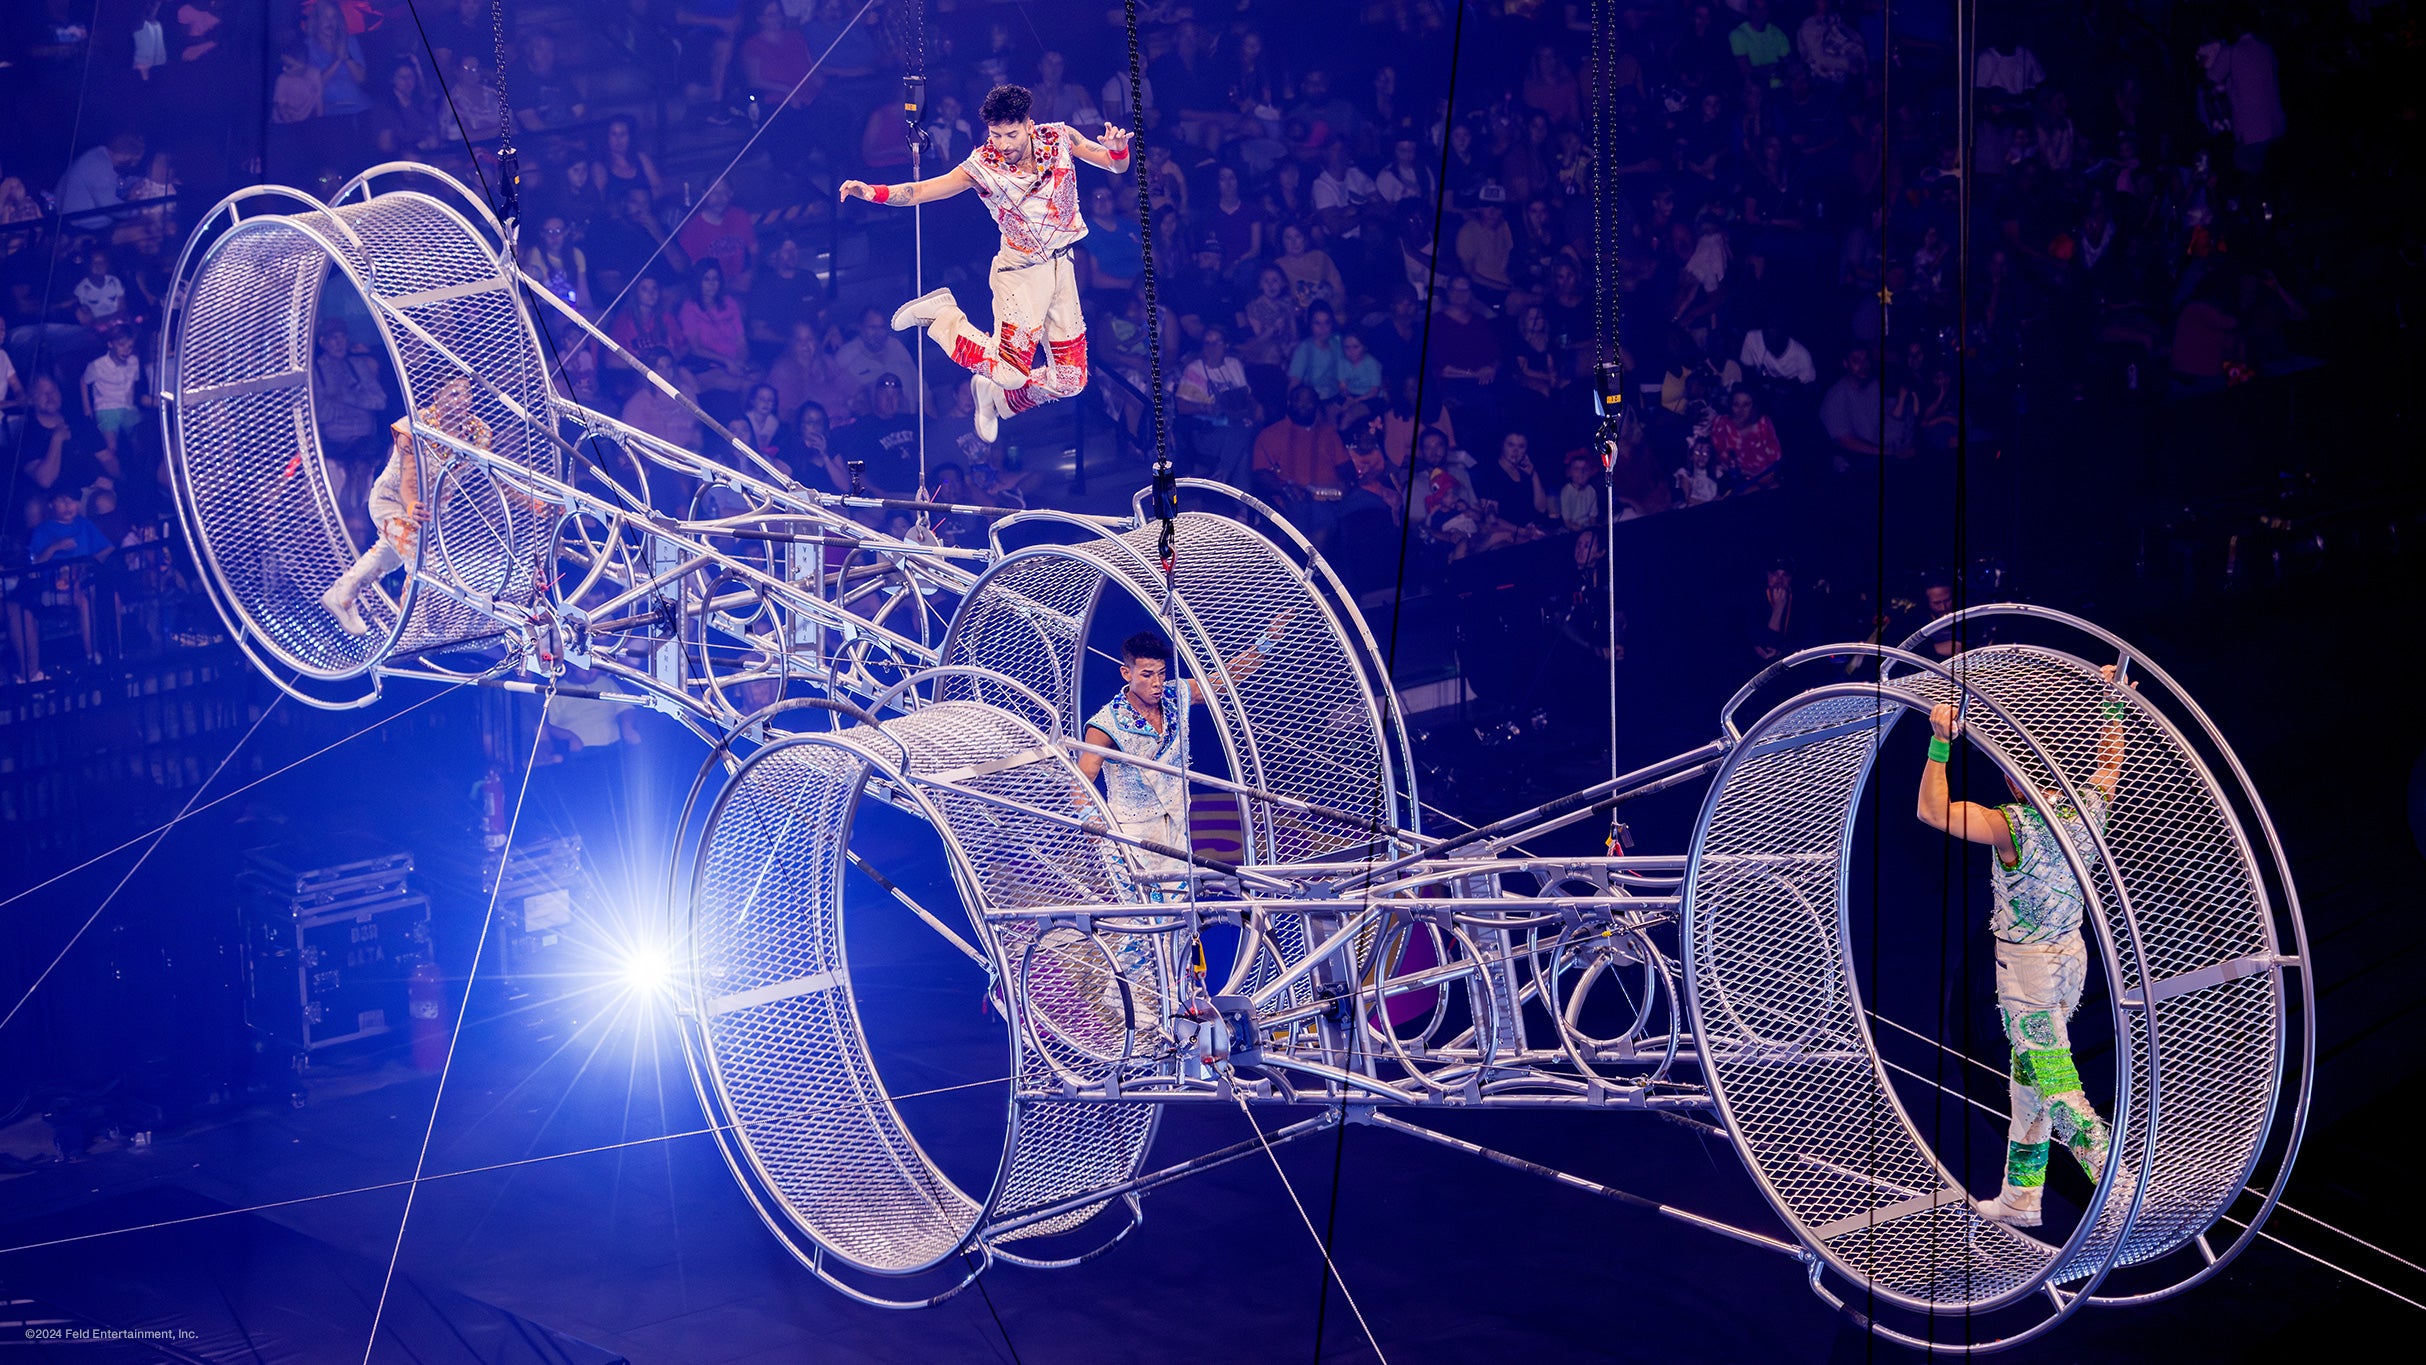 Ringling Bros. and Barnum & Bailey presents The Greatest Show On Earth presales in Charleston